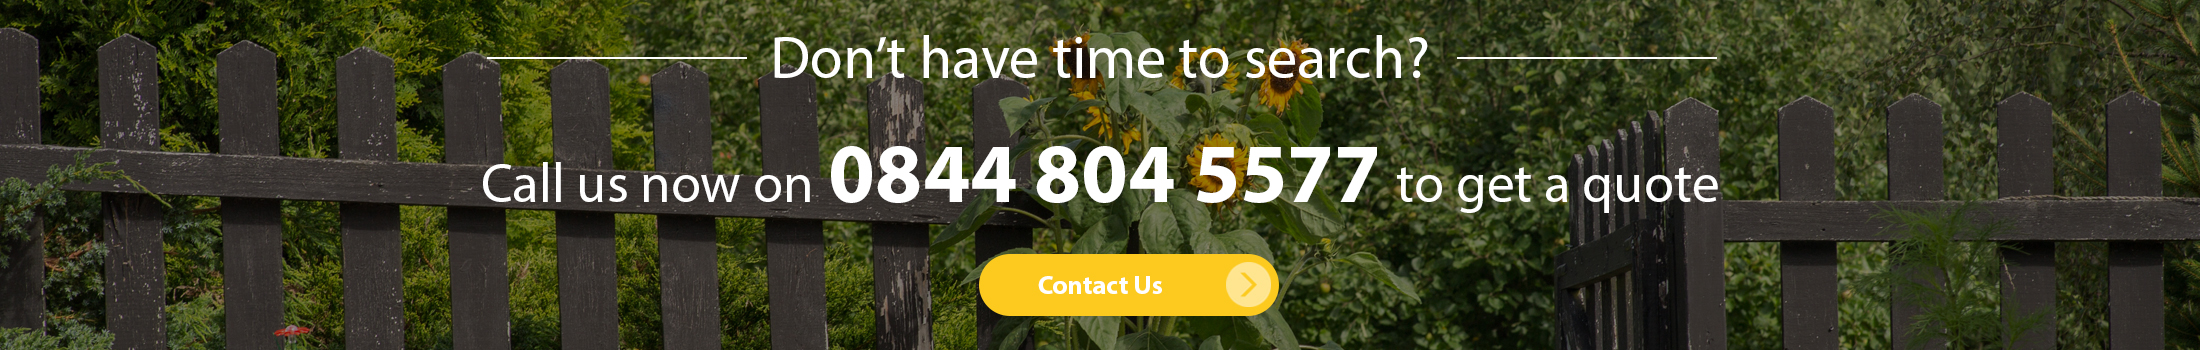 Don`t have time to search? Call us on 0844 804 5577 to get a quote